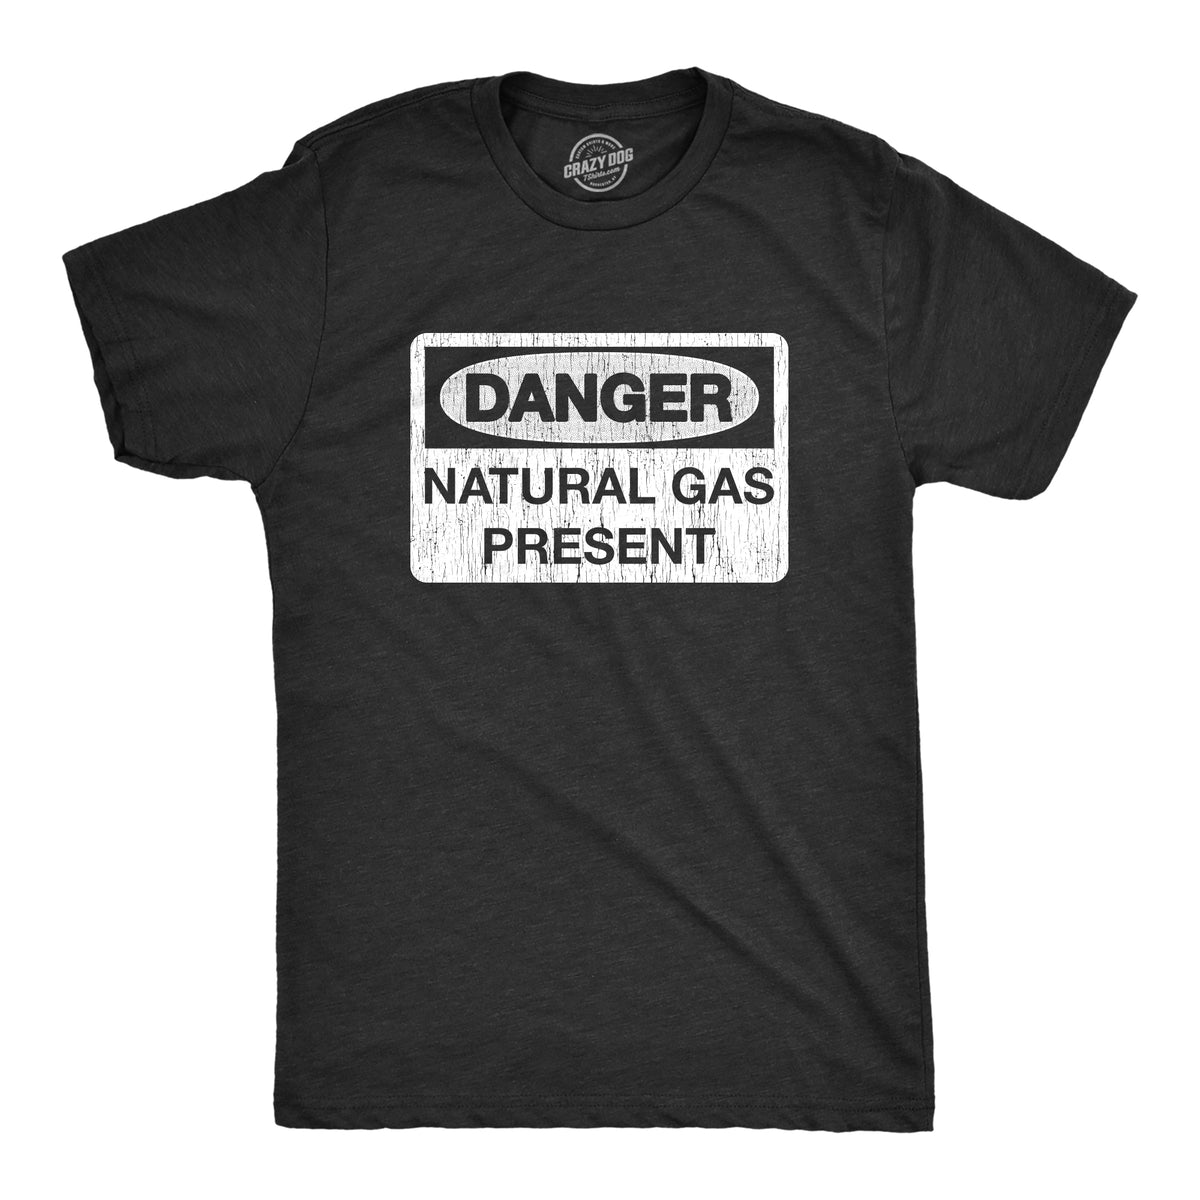 Funny Heather Black - Natural Gas Danger Natural Gas Present Mens T Shirt Nerdy toilet Tee